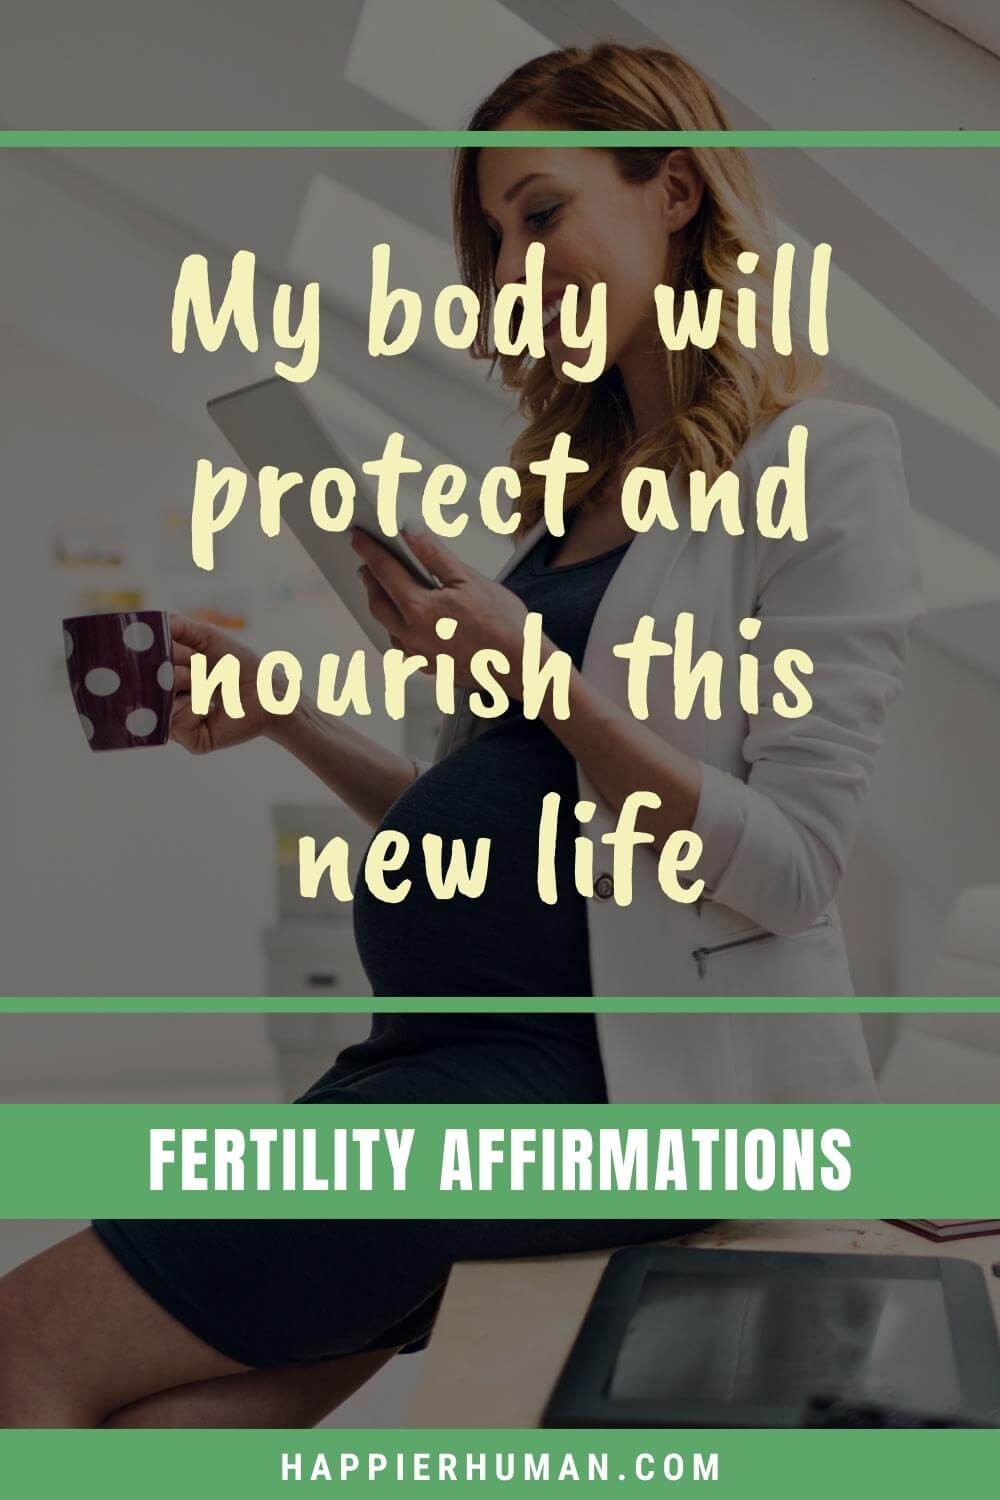 Fertility Affirmations - My body will protect and nourish this new life | affirmations for conceiving twins | pregnancy affirmations | ertility affirmations app